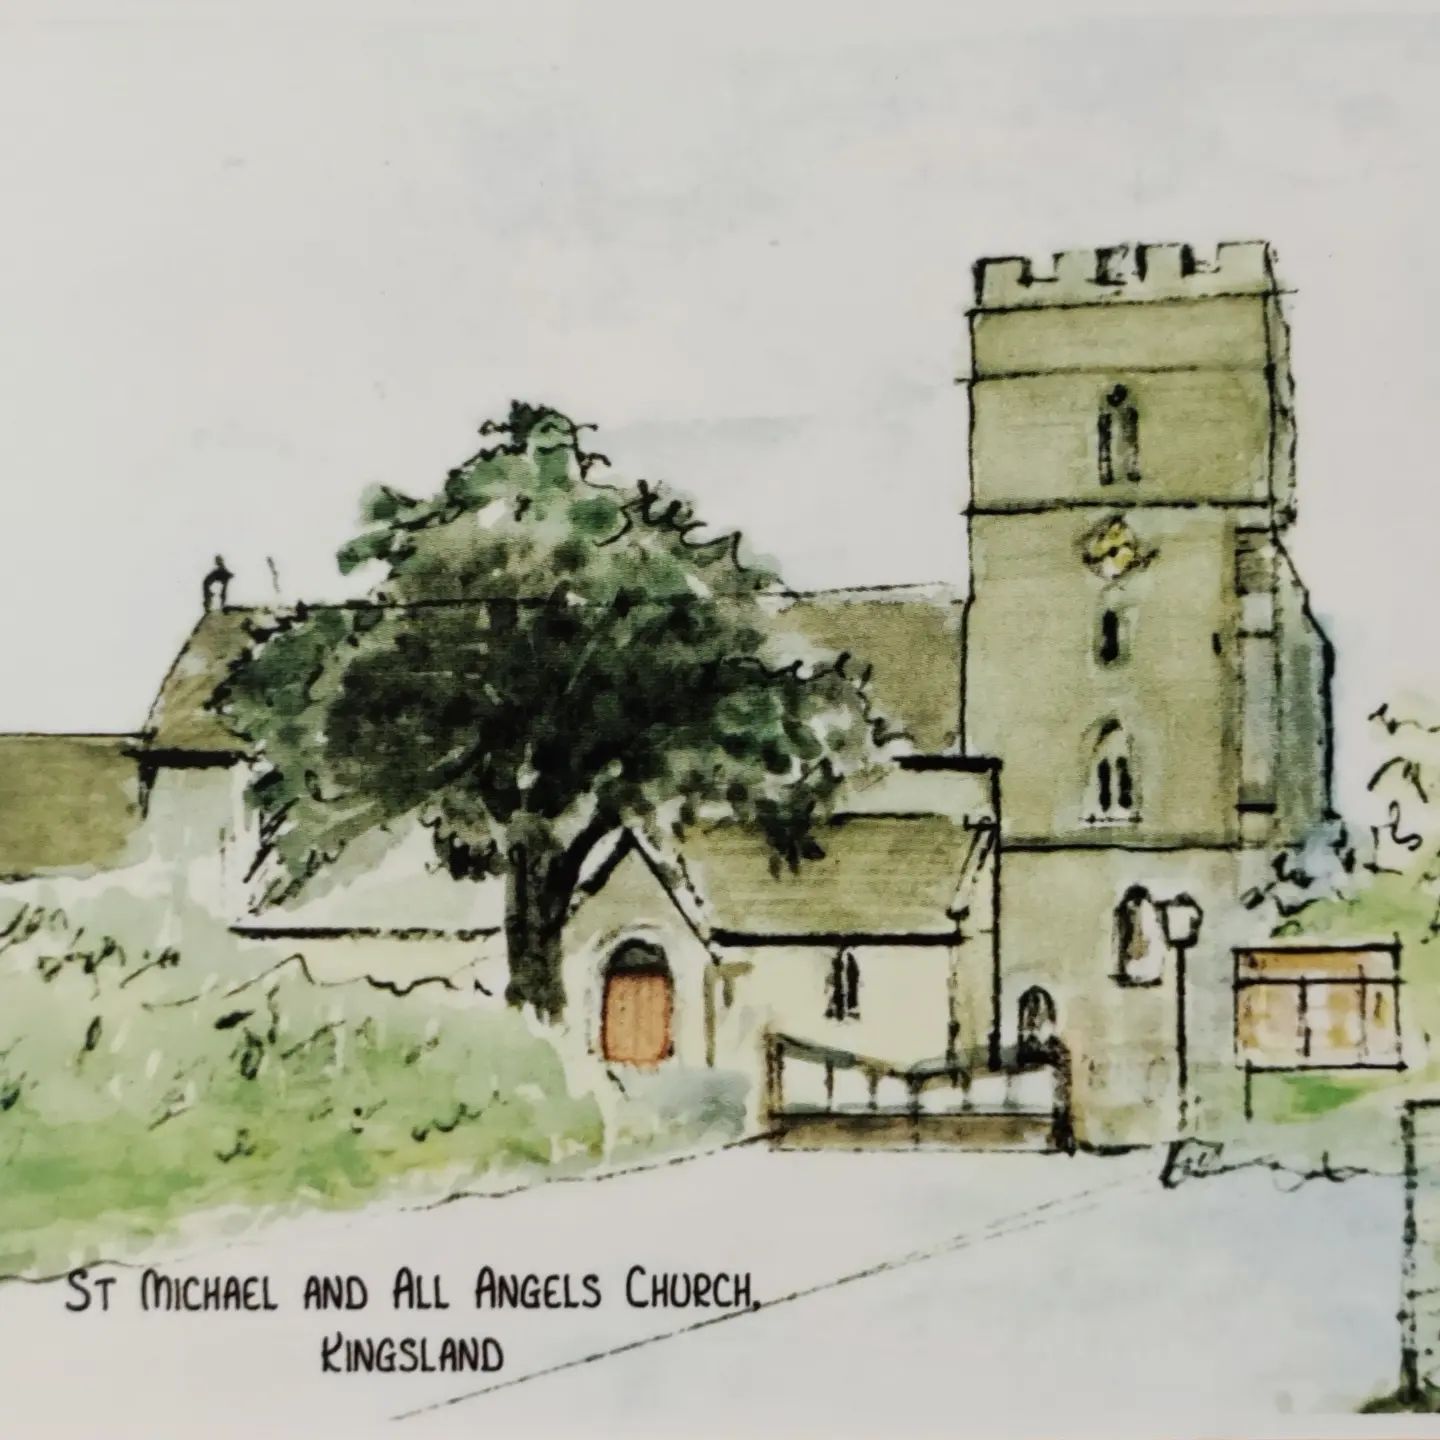 A watercolor painting of a church.